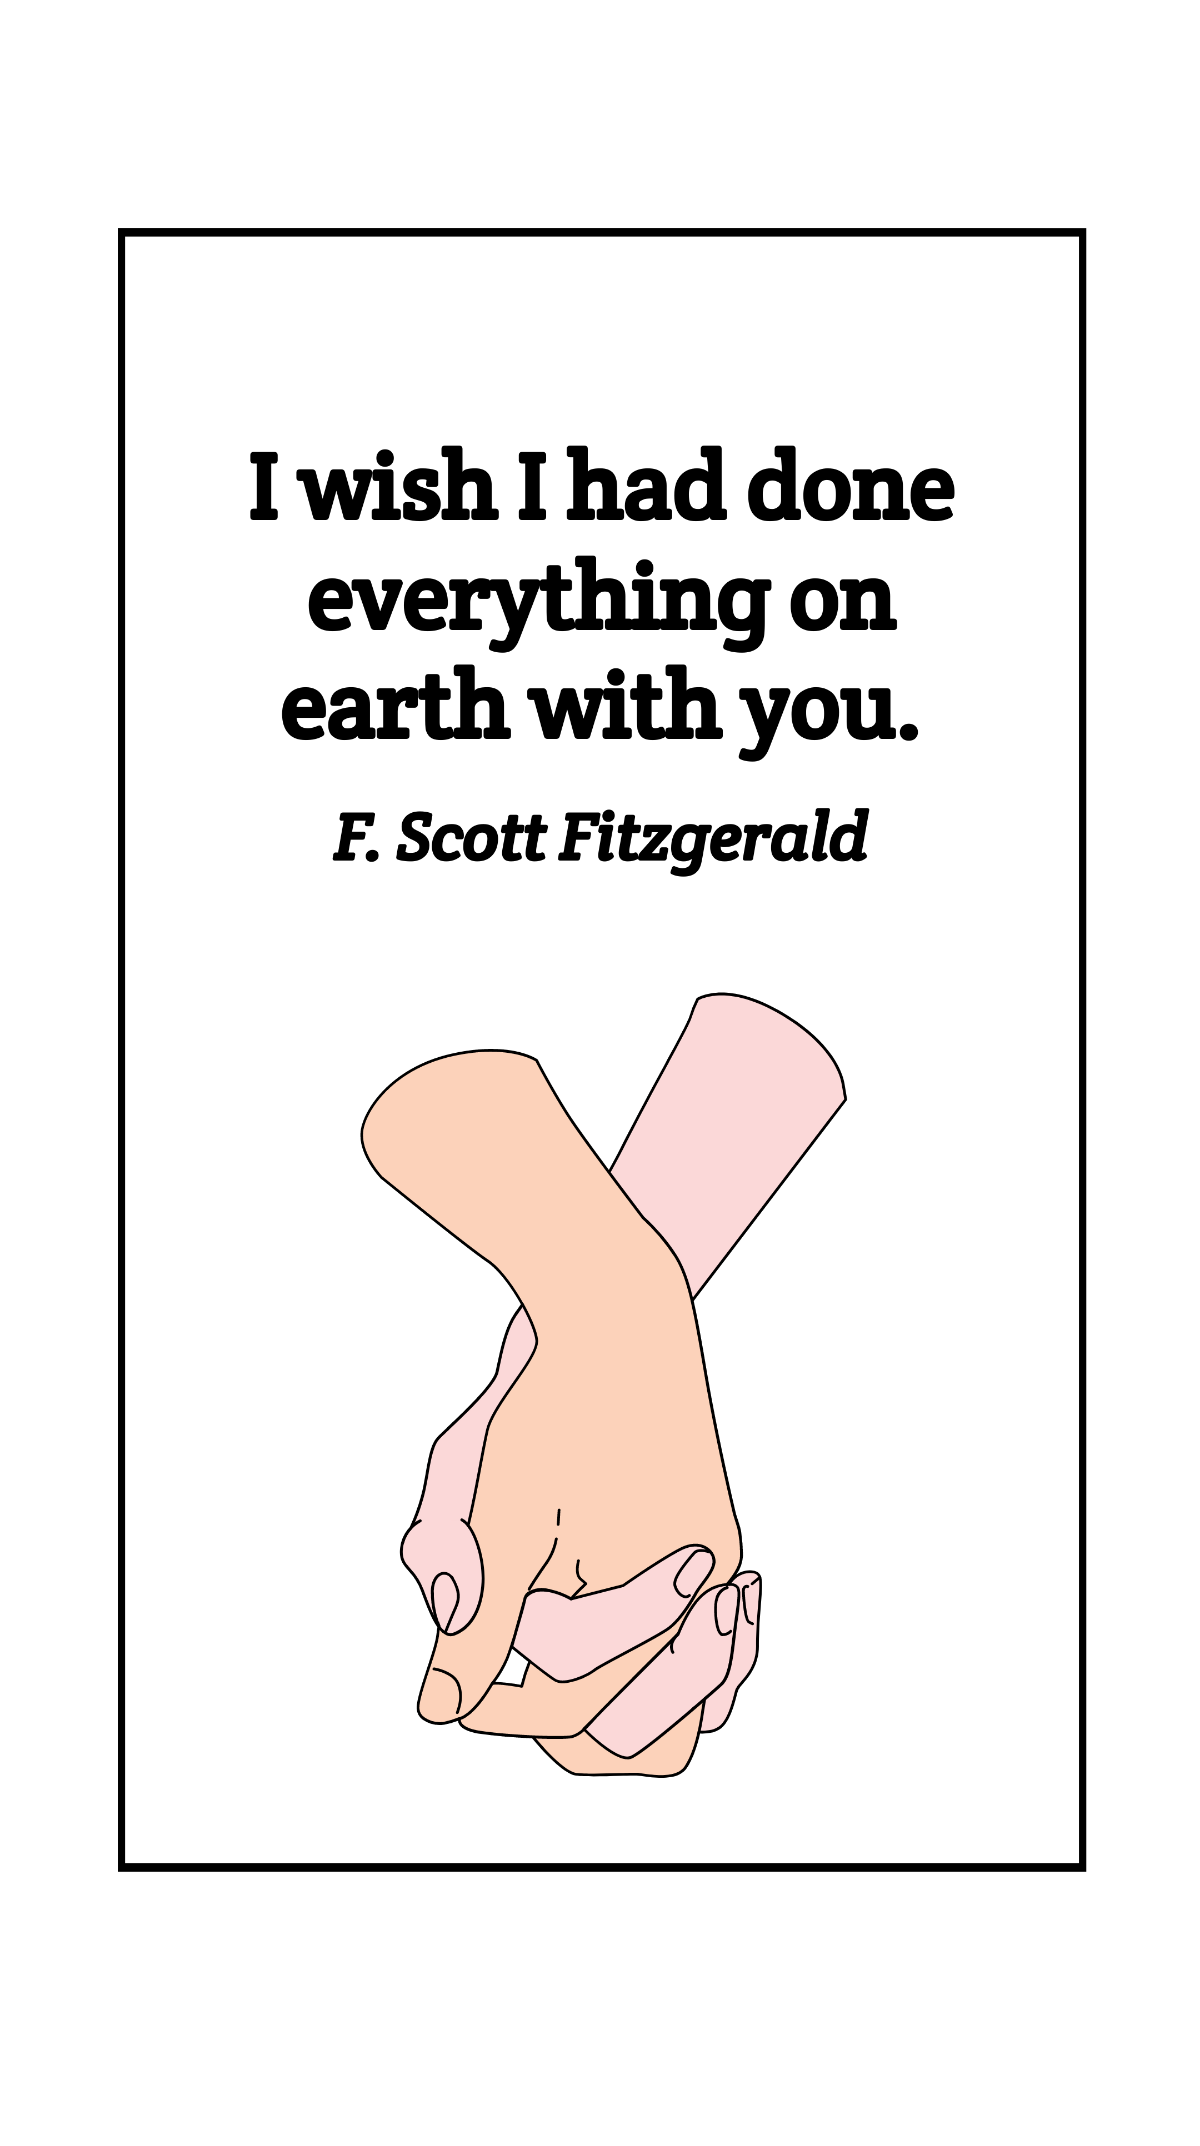 Free F. Scott Fitzgerald - I wish I had done everything on earth with you. Template